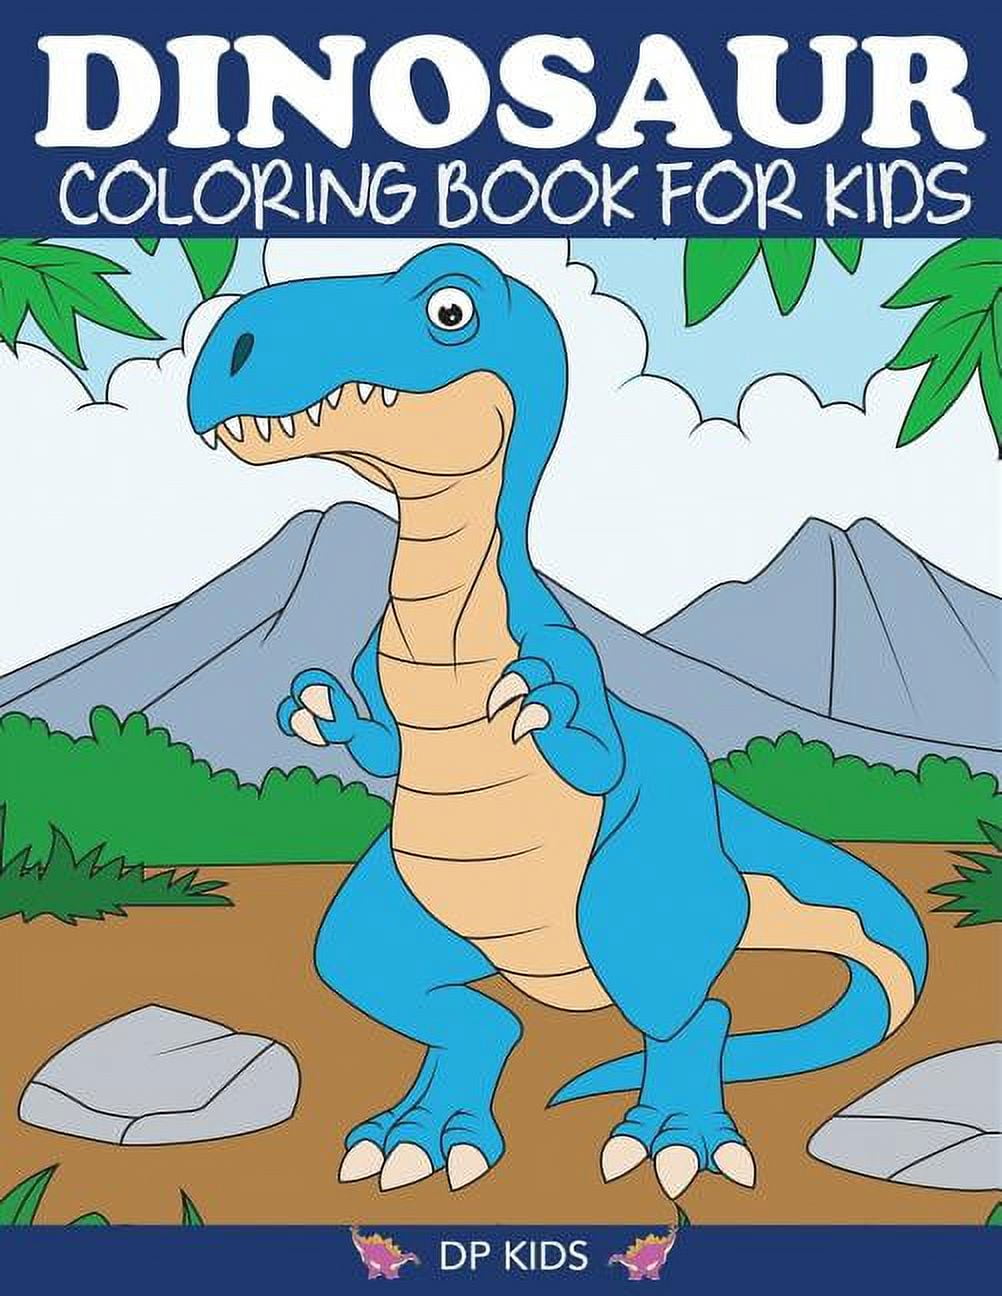 Dinosaur Coloring Book for 5 Year Old: Fantastic 50 Dinosaur Coloring Pages  For Boys, Girls, Toddlers, Preschoolers, Kids 3-8, 6-8 (Dinosaur Books)  (Paperback)